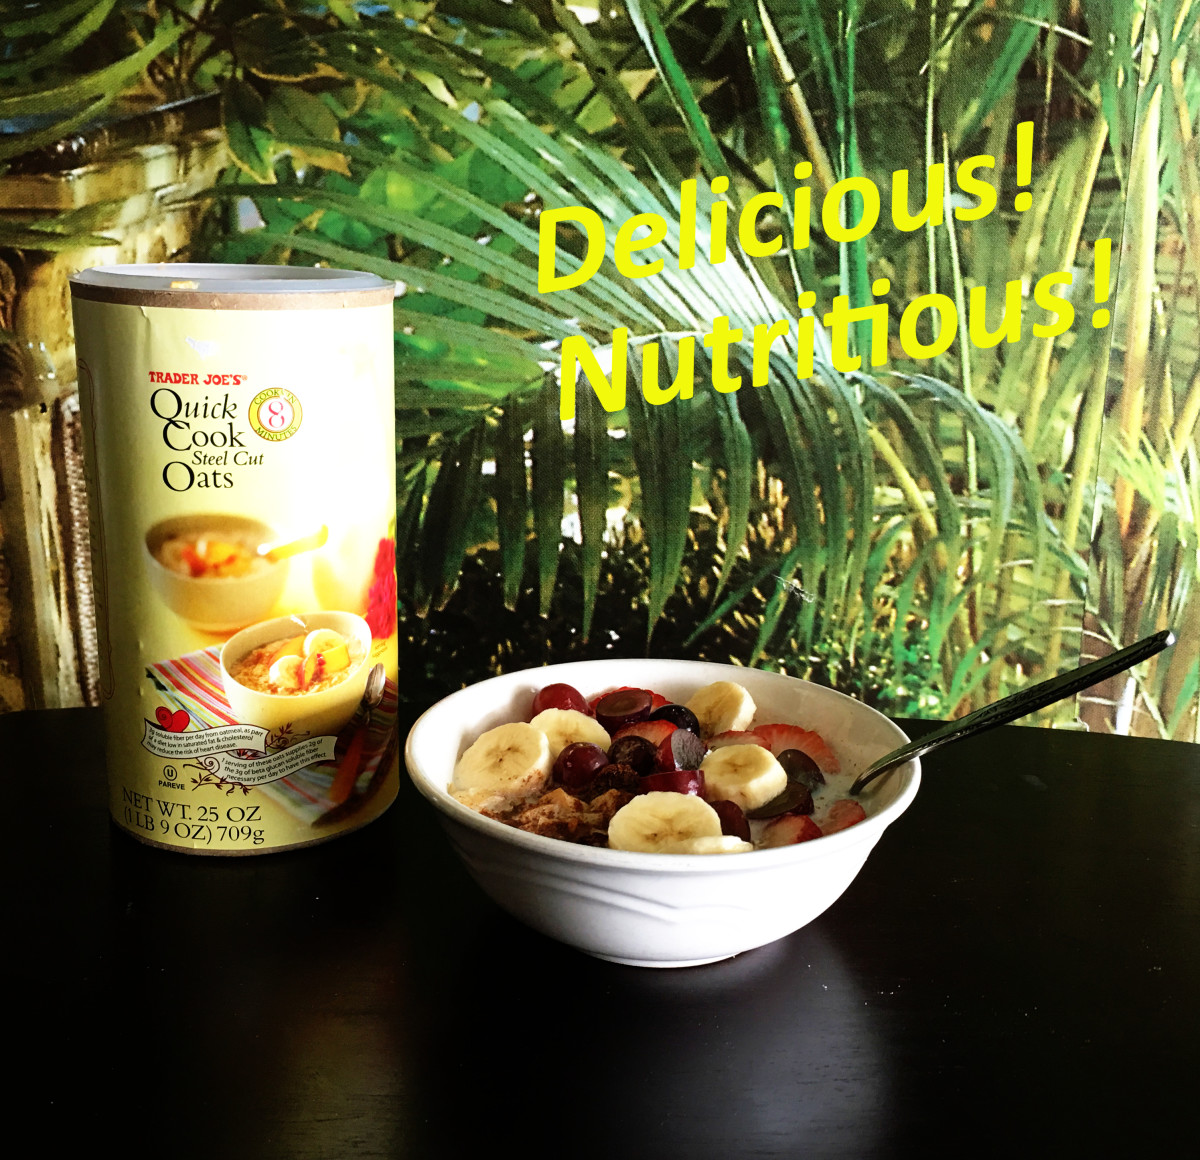 10 Reasons Why We Eat This Nutritious Breakfast Dish Made With Trader Joe's Steel Cut Oats